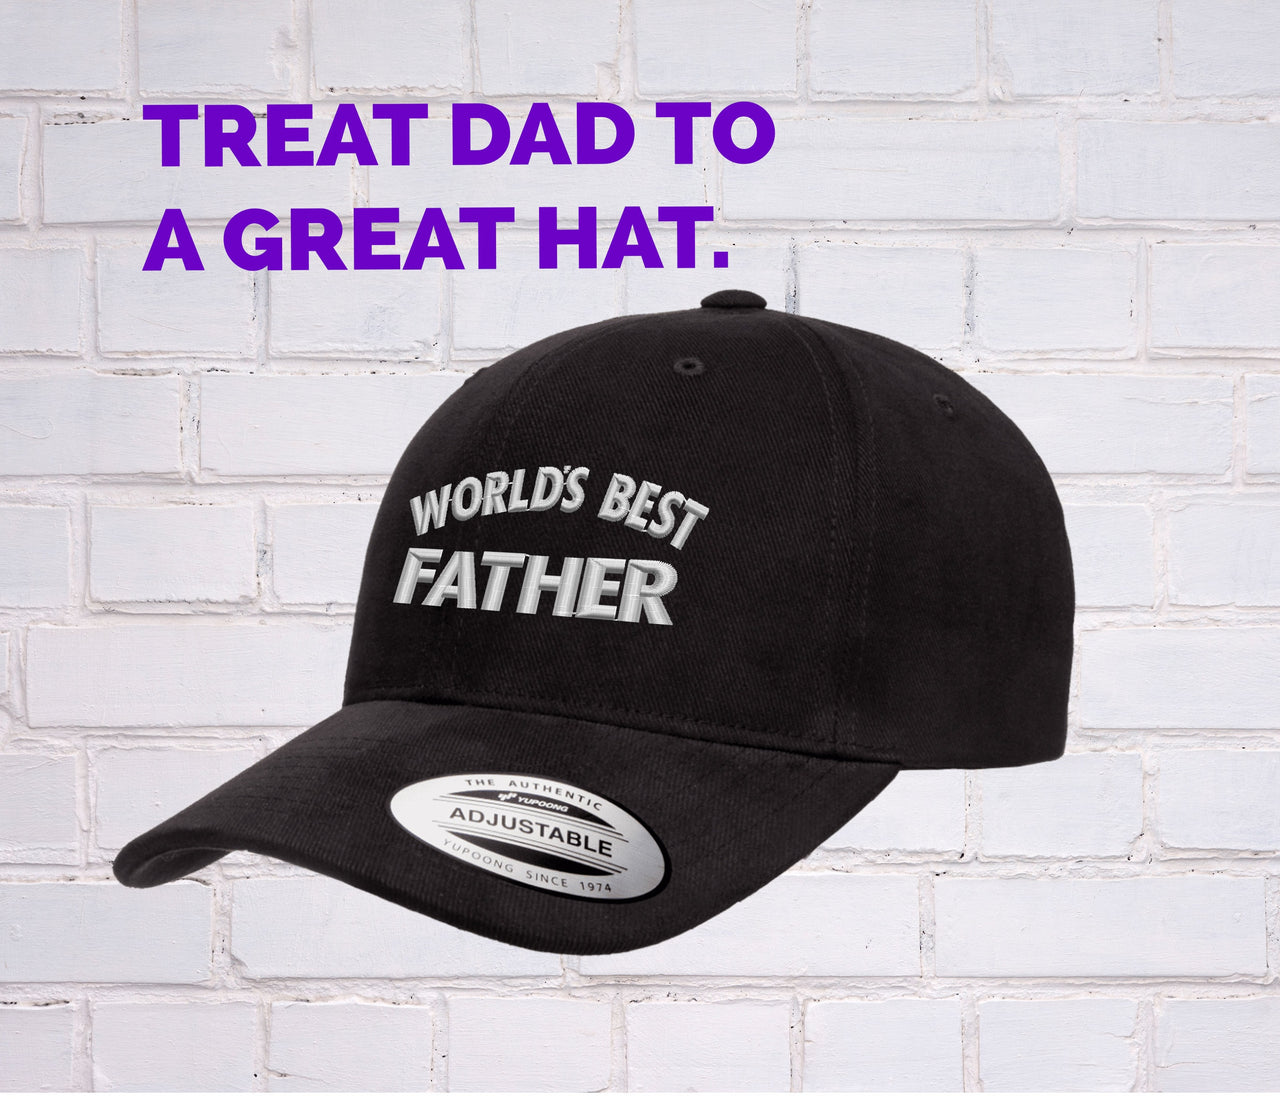 World's Best Father, Dad Hat, Dad Cap, Fathers Day, Hat for Dad, Father's Day, Dad Gift, Gift for Dad, Daddy hat, Father, Embroidered Hat